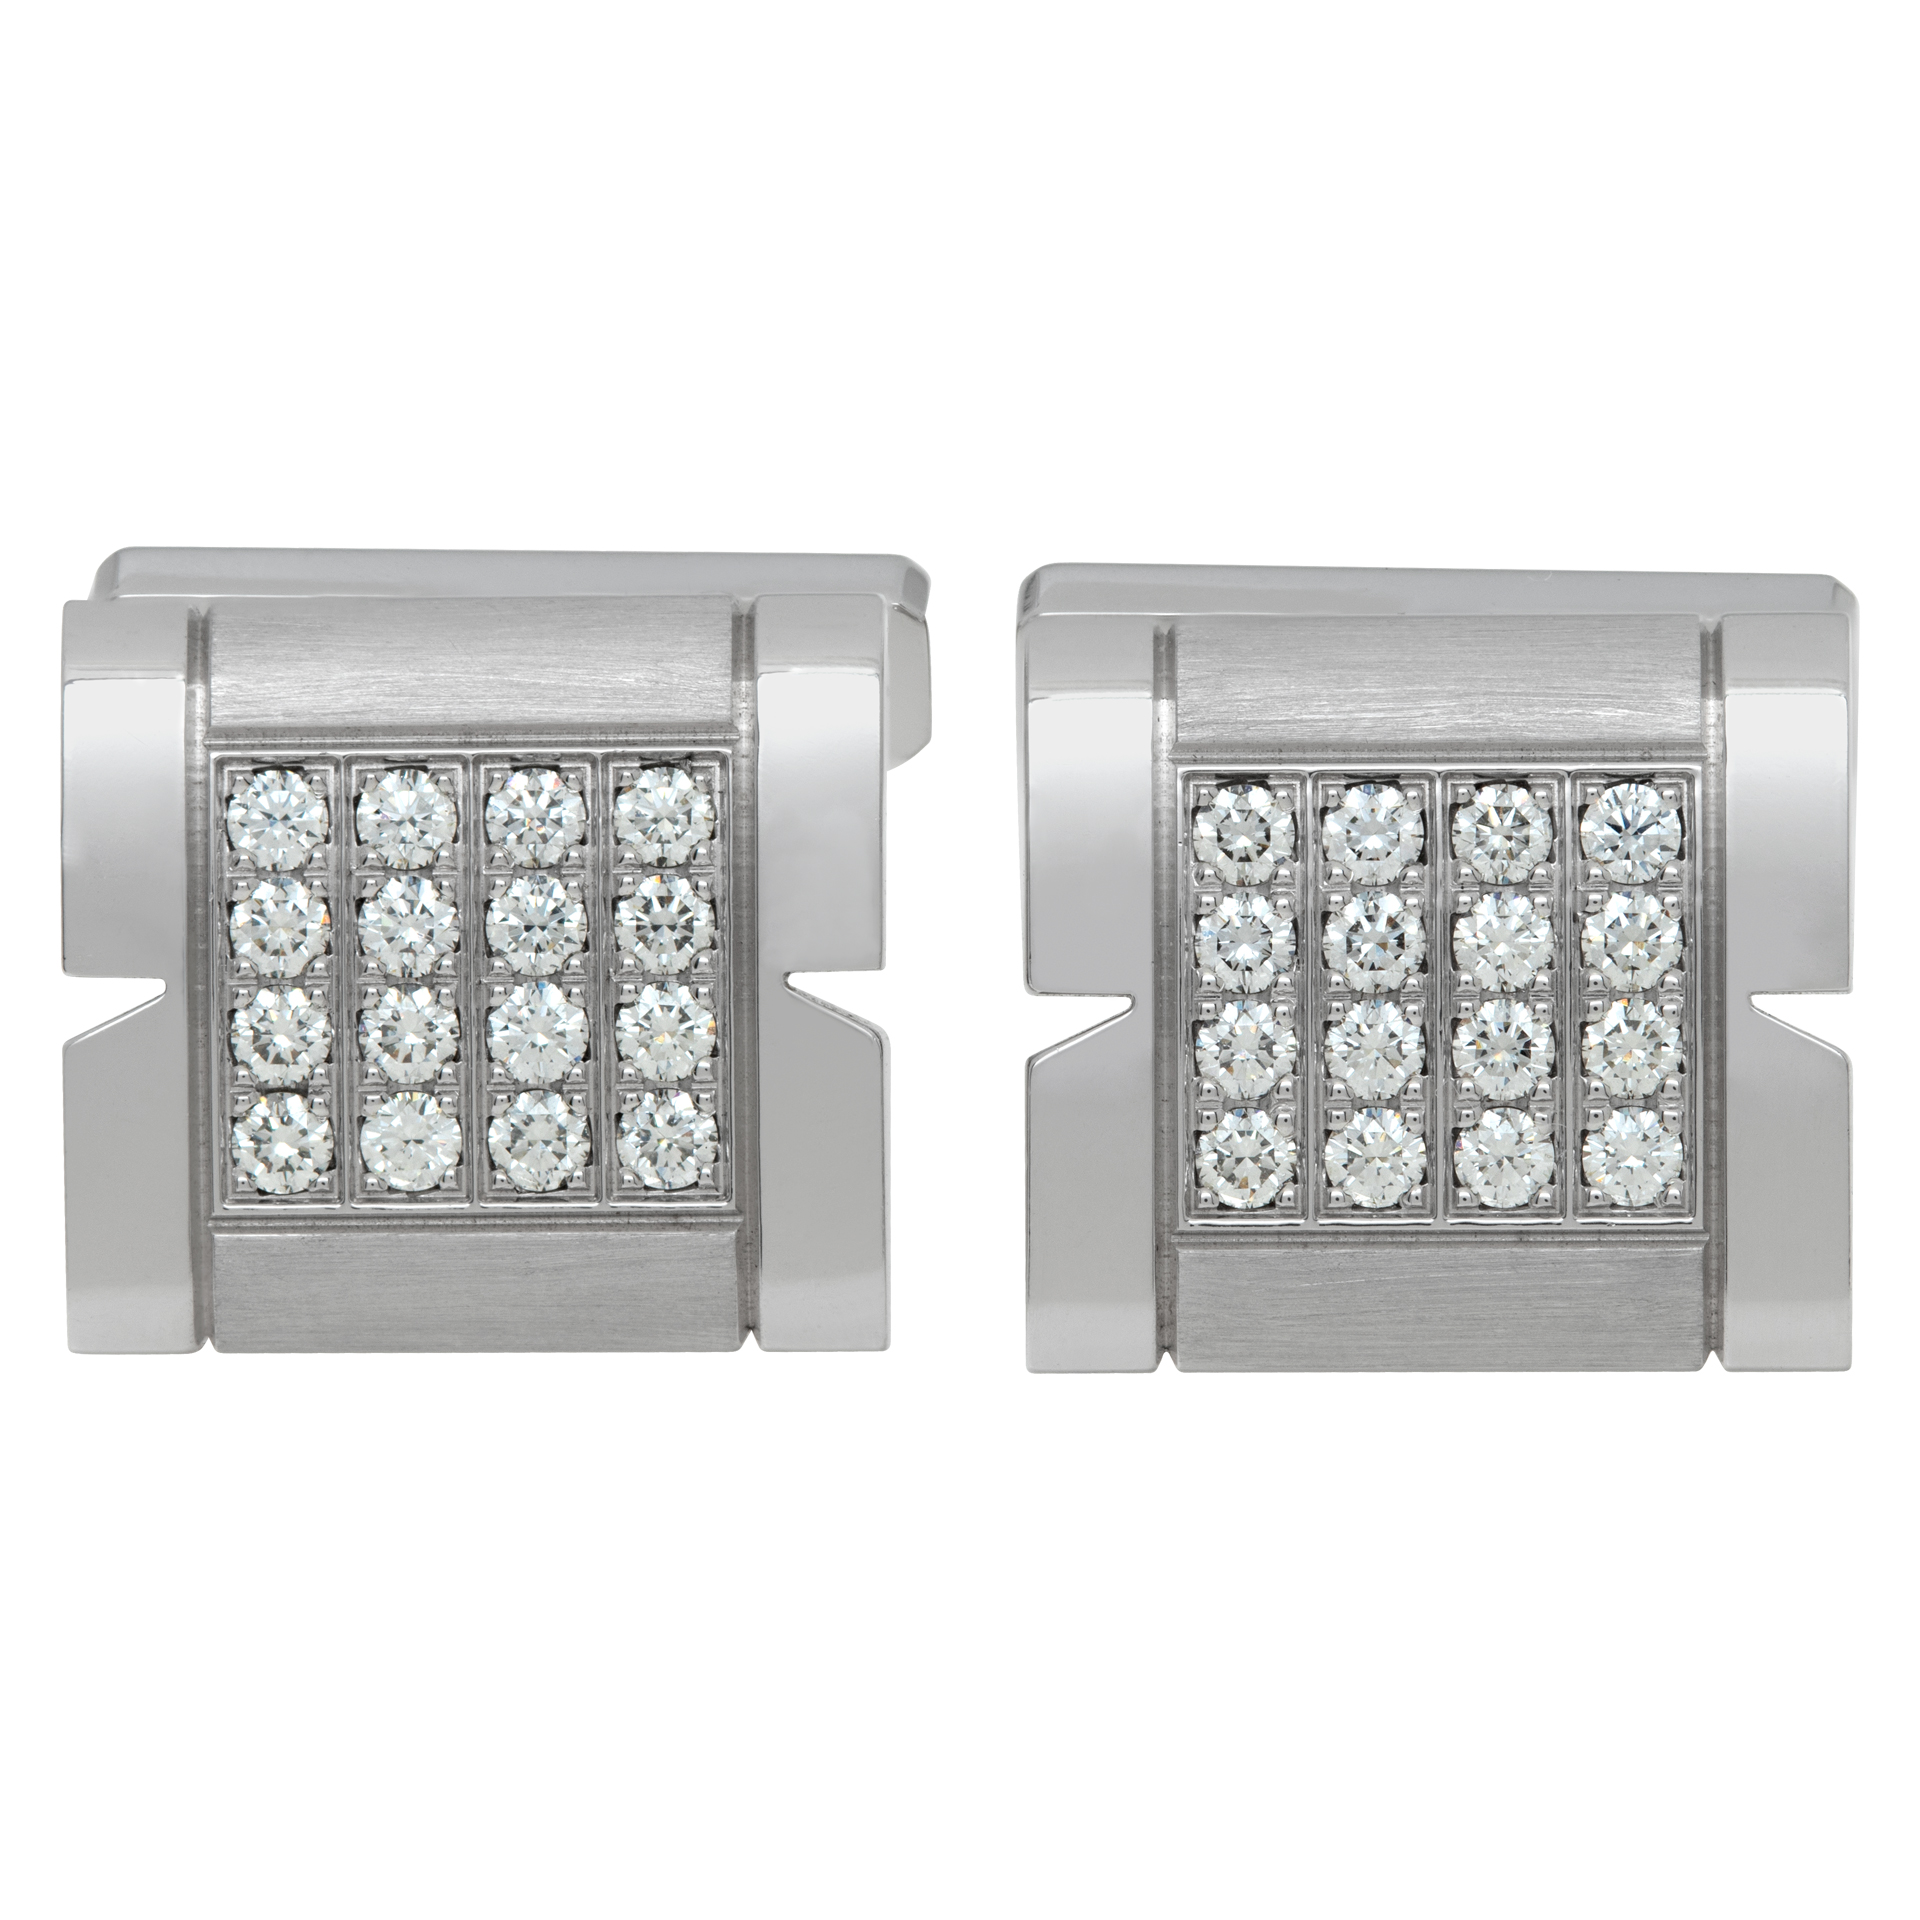 Cartier Tank Francaise cufflinks in 18k white gold with diamonds image 1